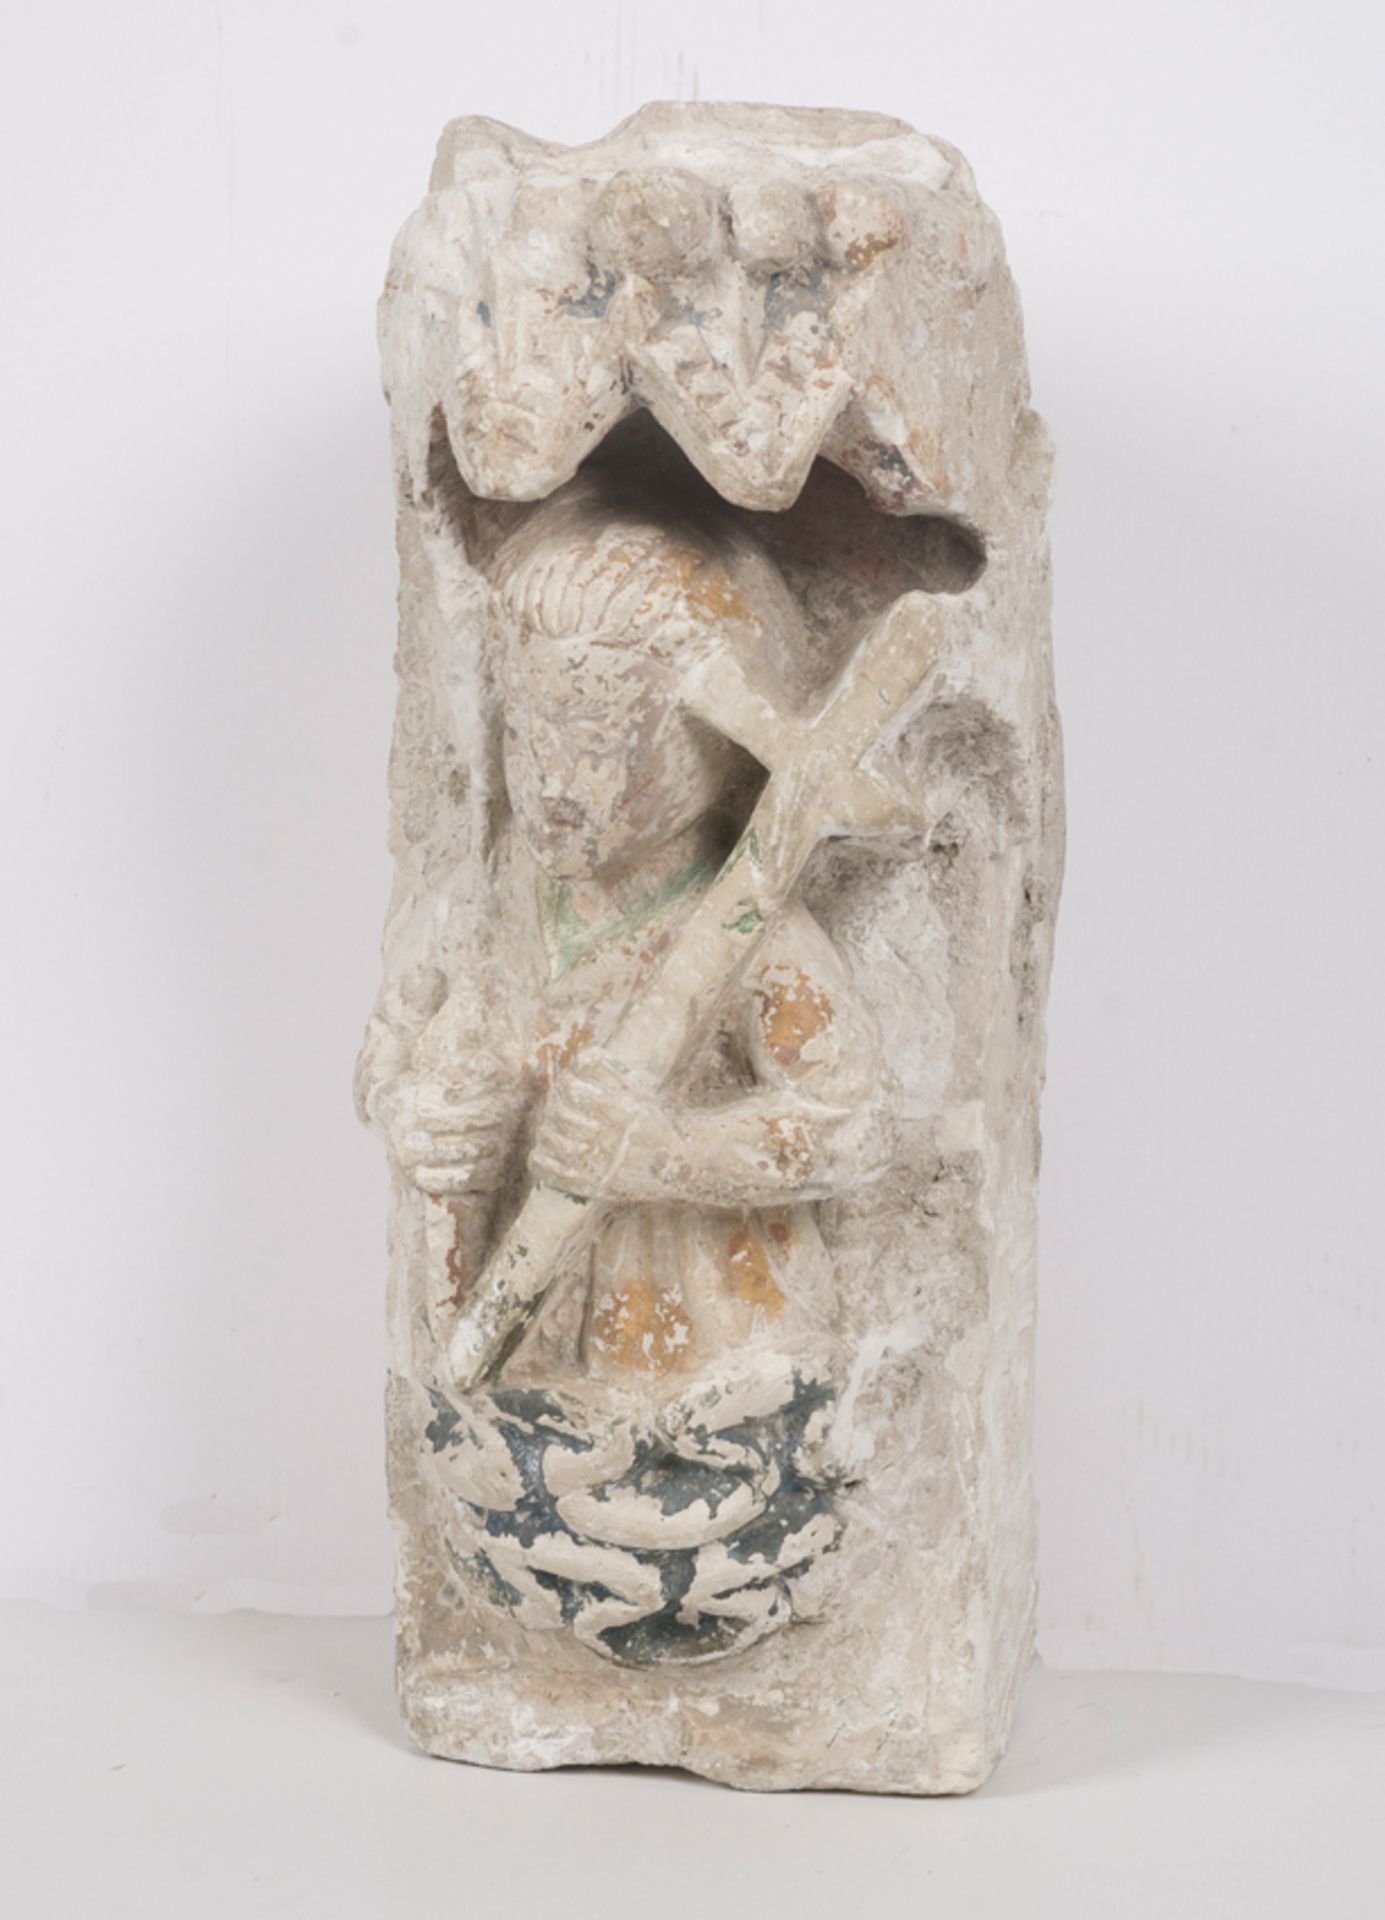 Set of for stone sculptures with polychrome residue. Romanesque. 13th century. - Image 2 of 8